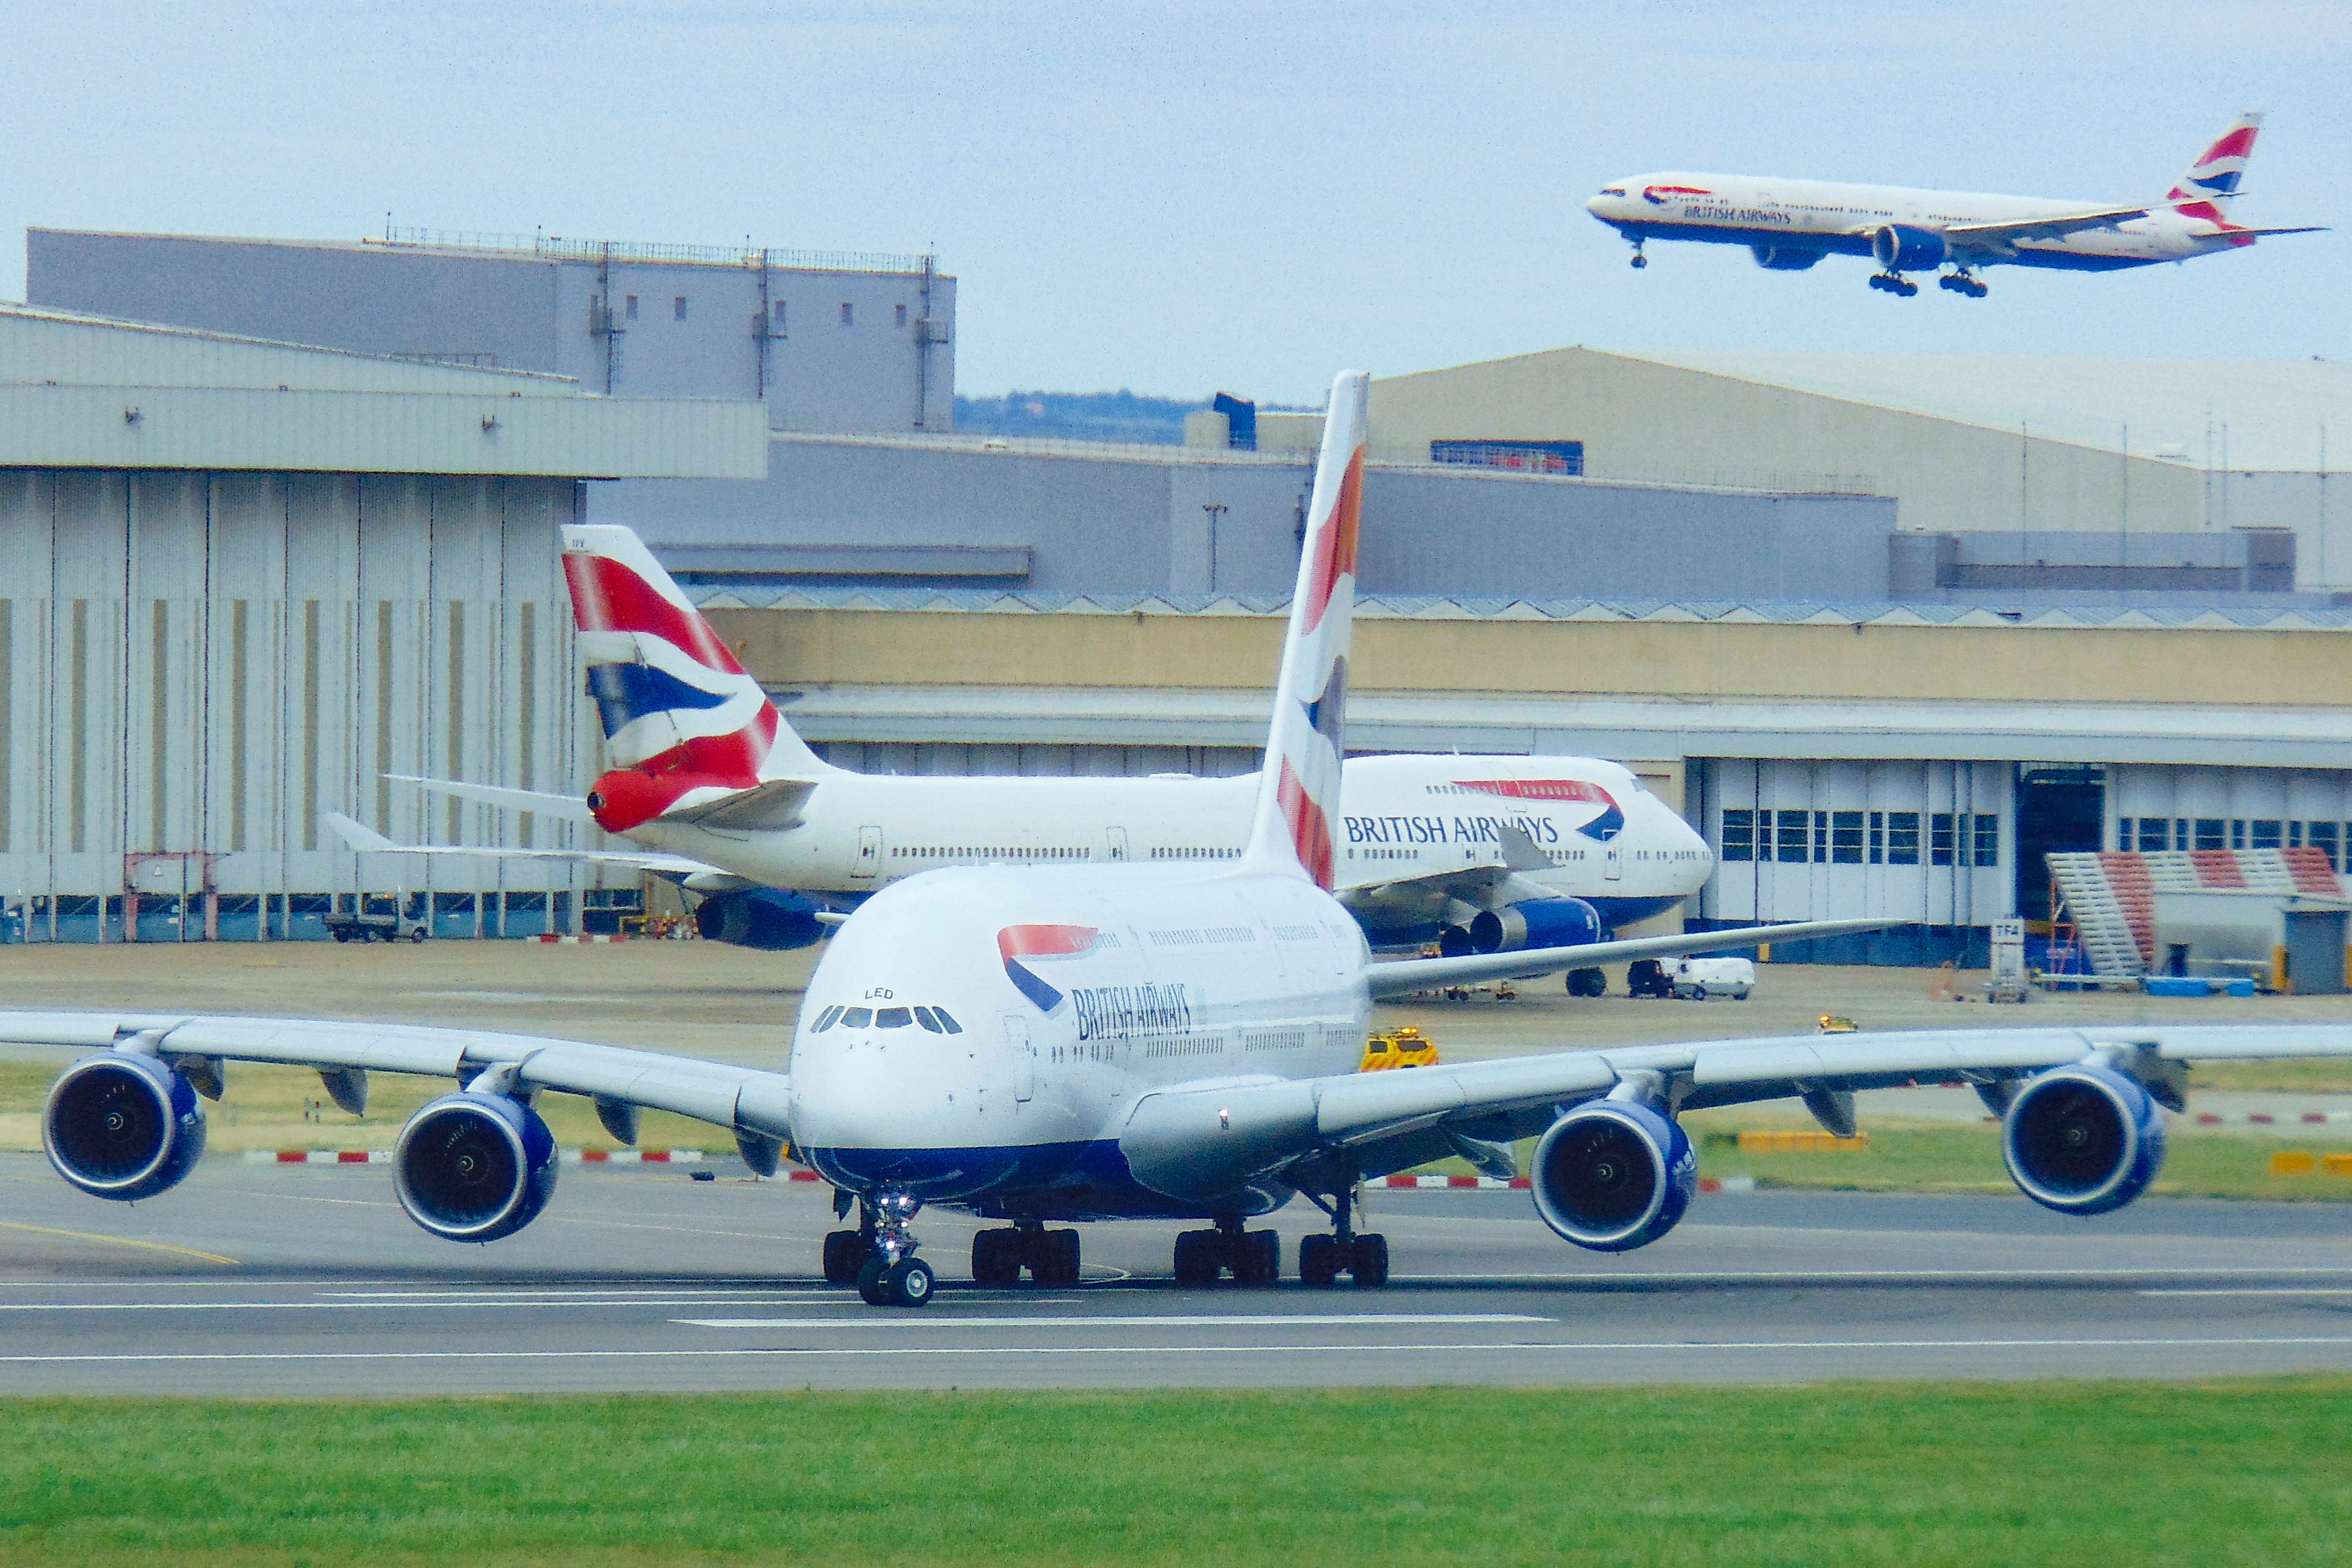 G-XLED/GXLED British Airways Airbus A380 Airframe Information - AVSpotters.com